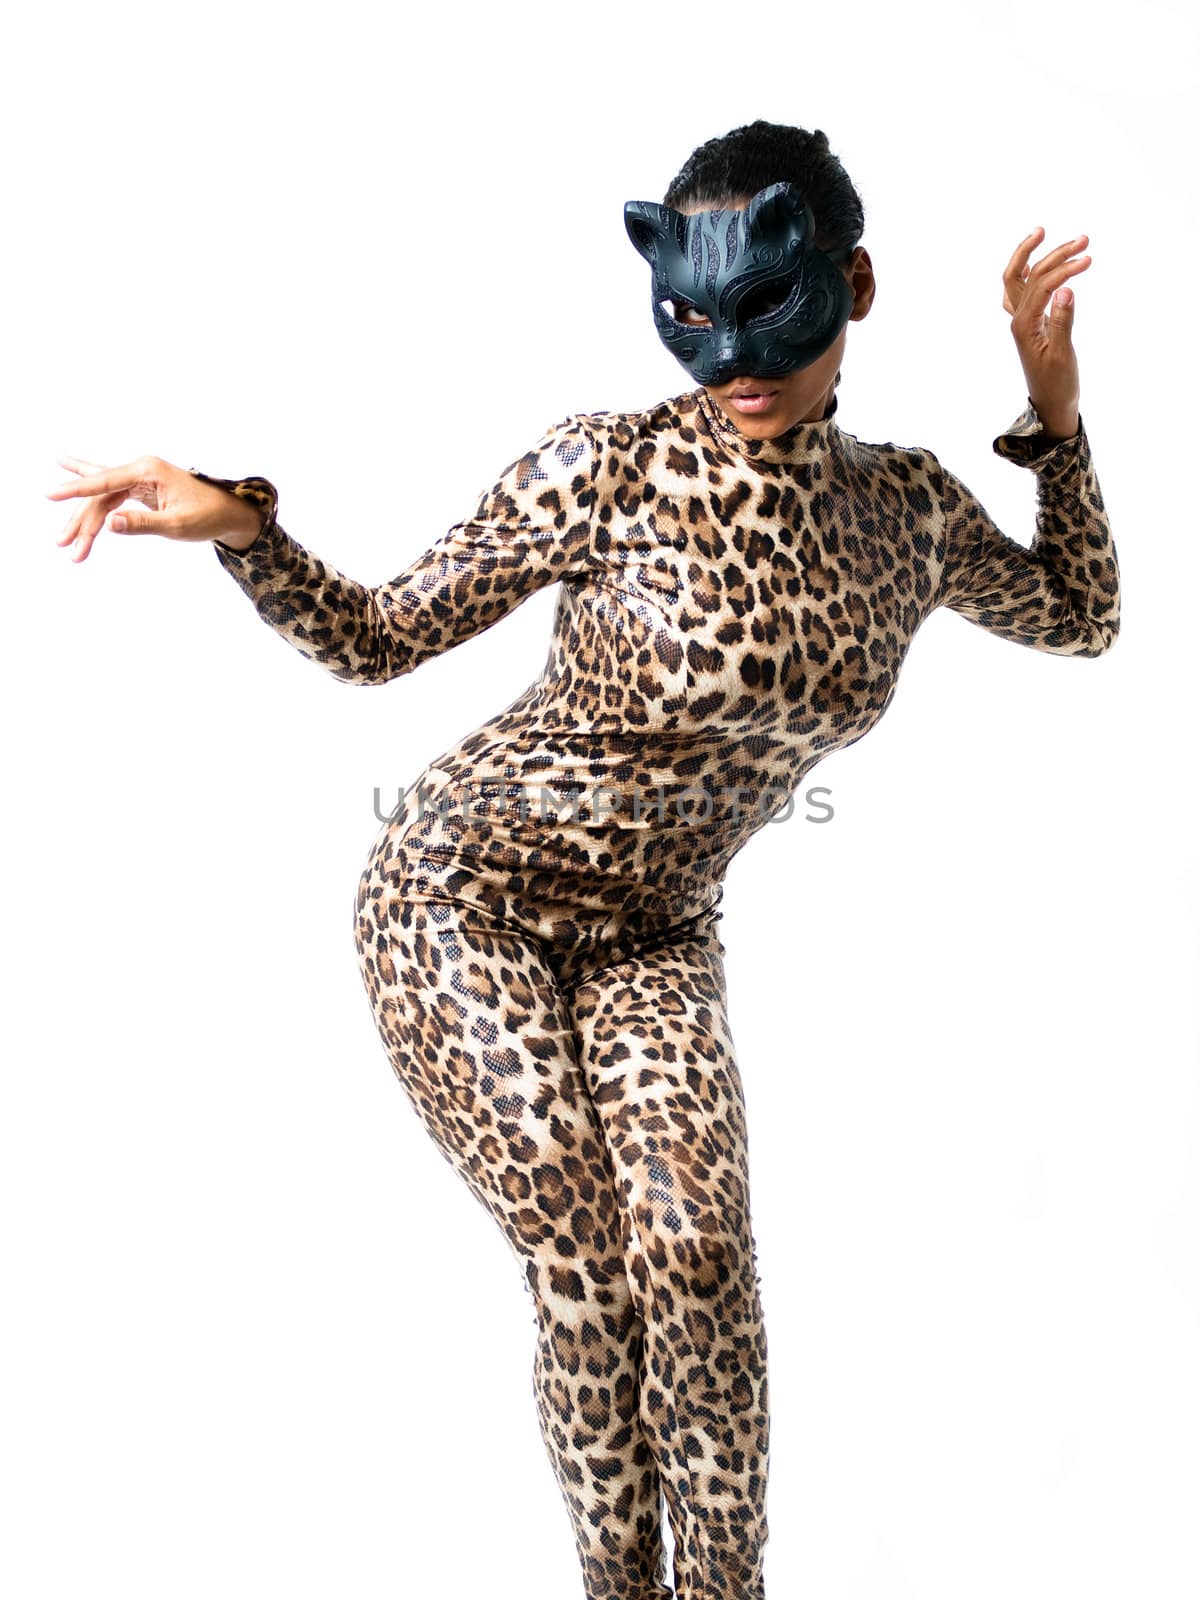 African dancer in leopard suit striking a dance pose wearing a cat mask